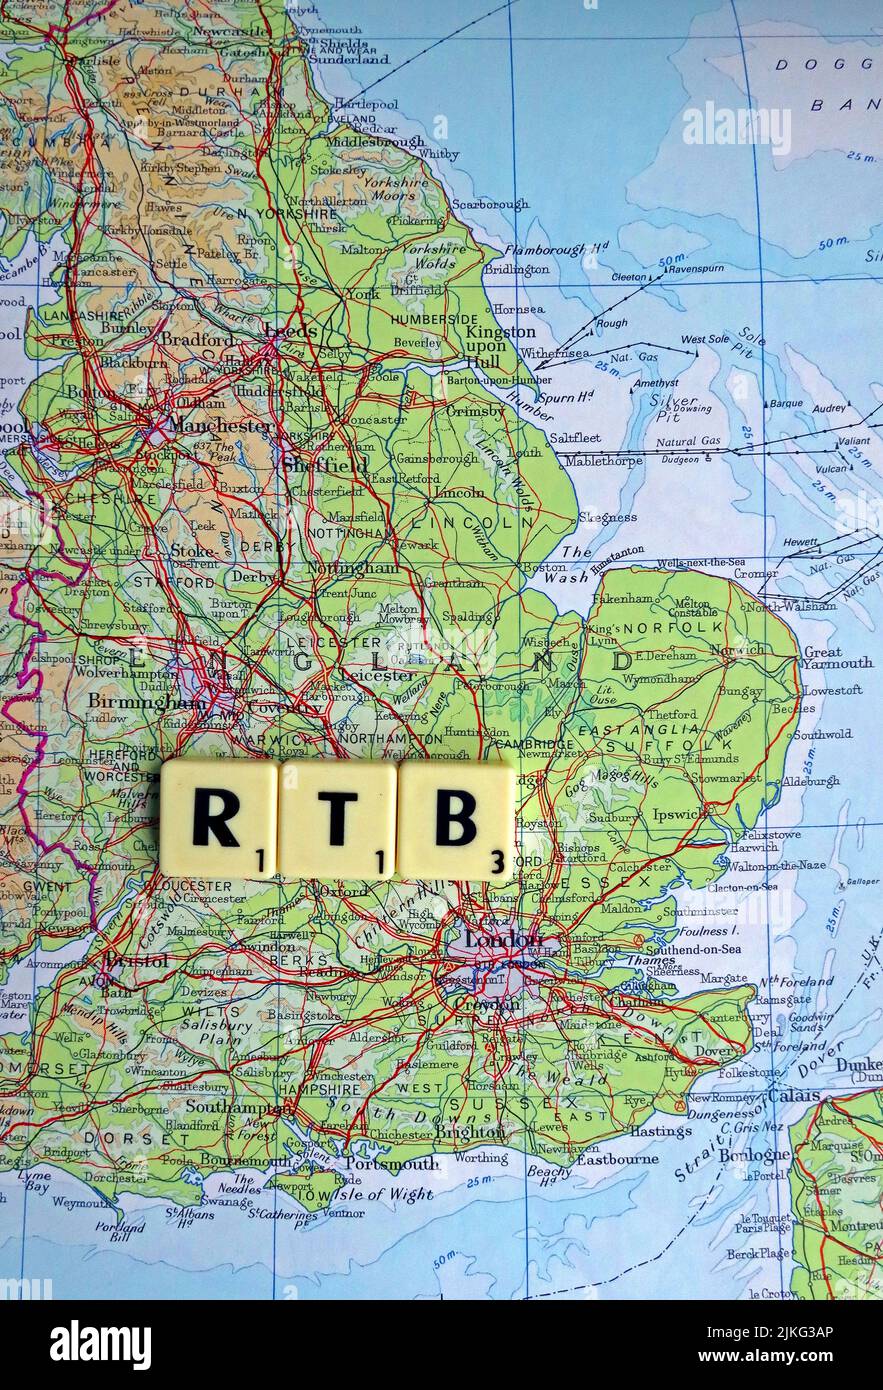 RTB, Right To Buy, spelled out in Scrabble letters on a map of England Stock Photo